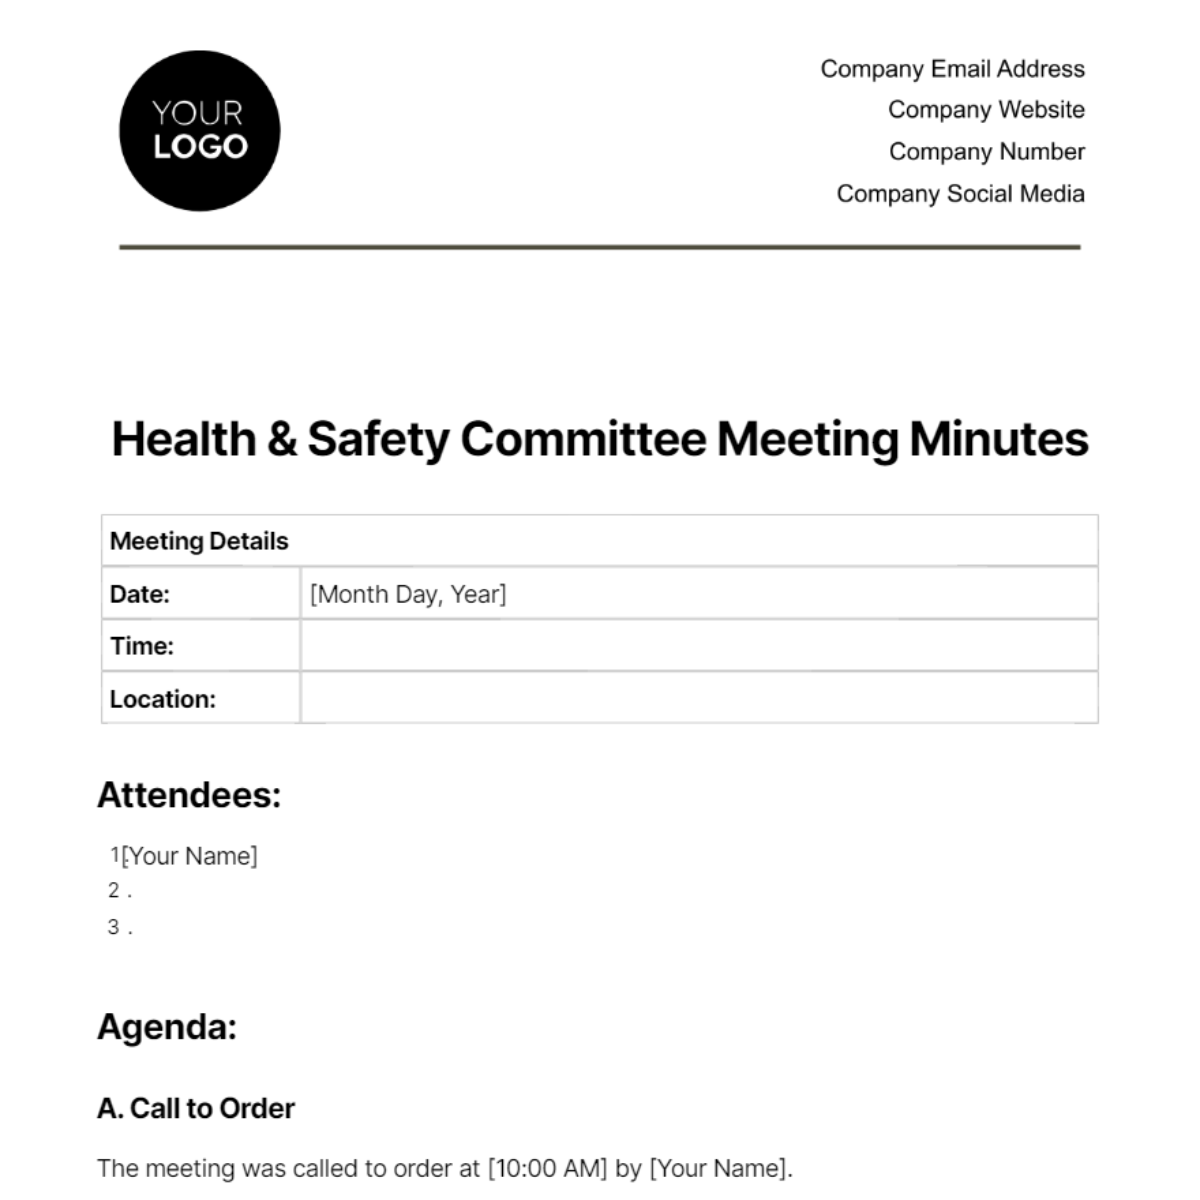 Health & Safety Committee Meeting Minutes Template